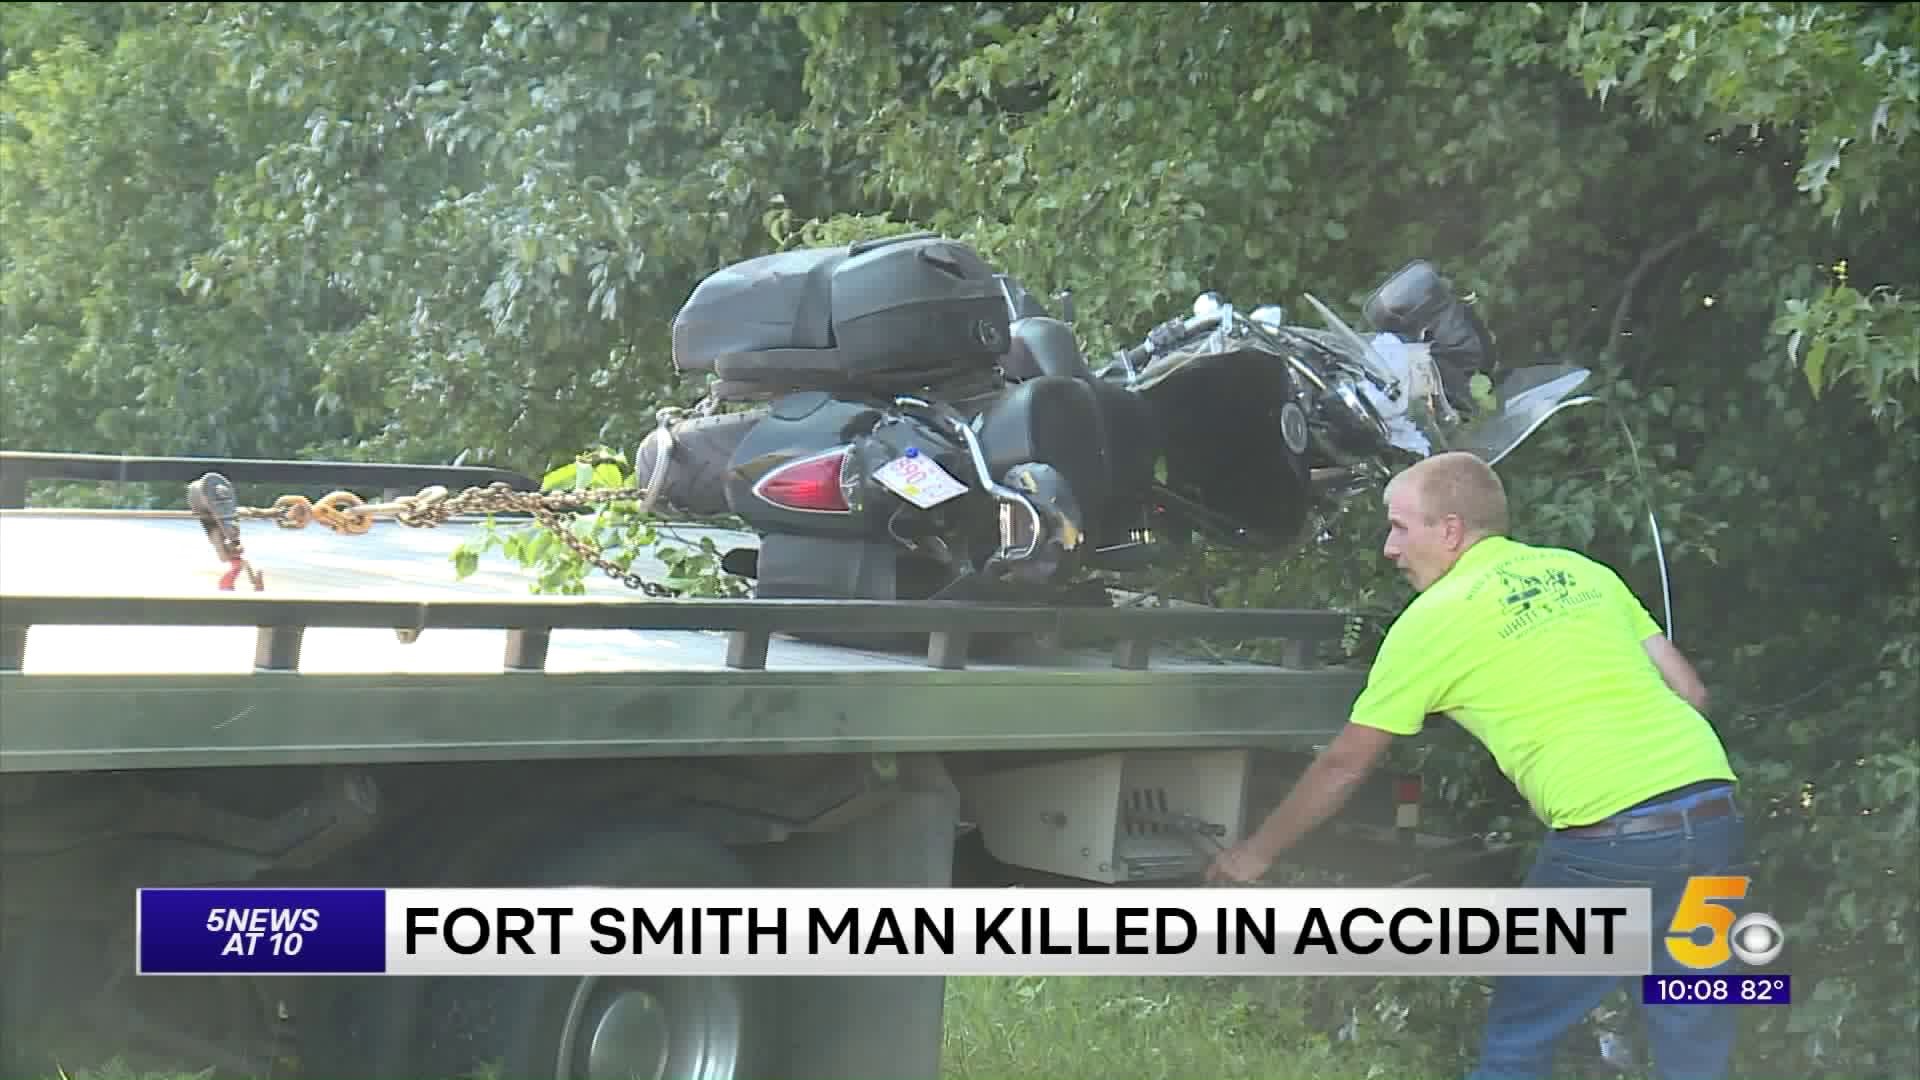 Fort Smith Man Killed in Motorcycle Accident